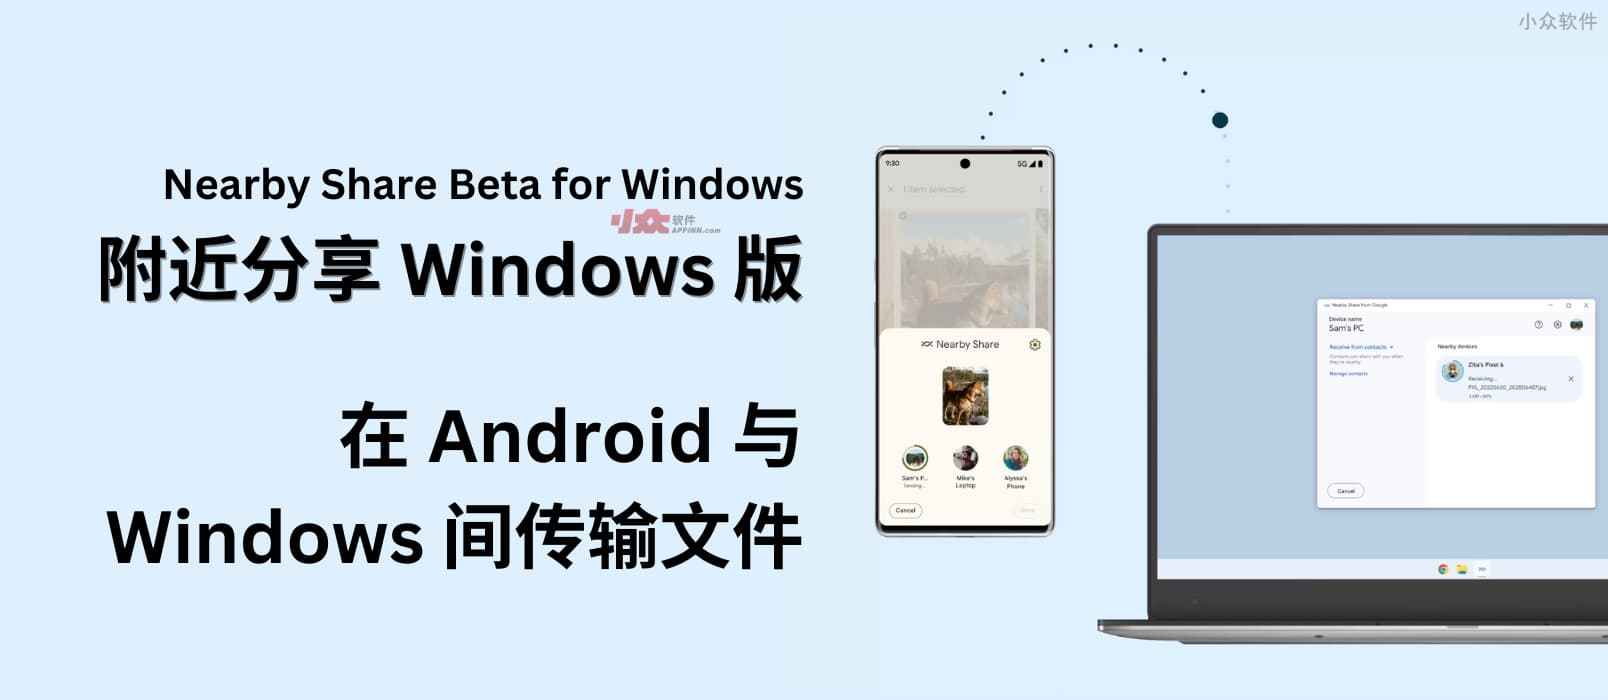 Nearby Share for Windows 正式版本发布，可以更方便的在 Android 与 Windows 间传输文件